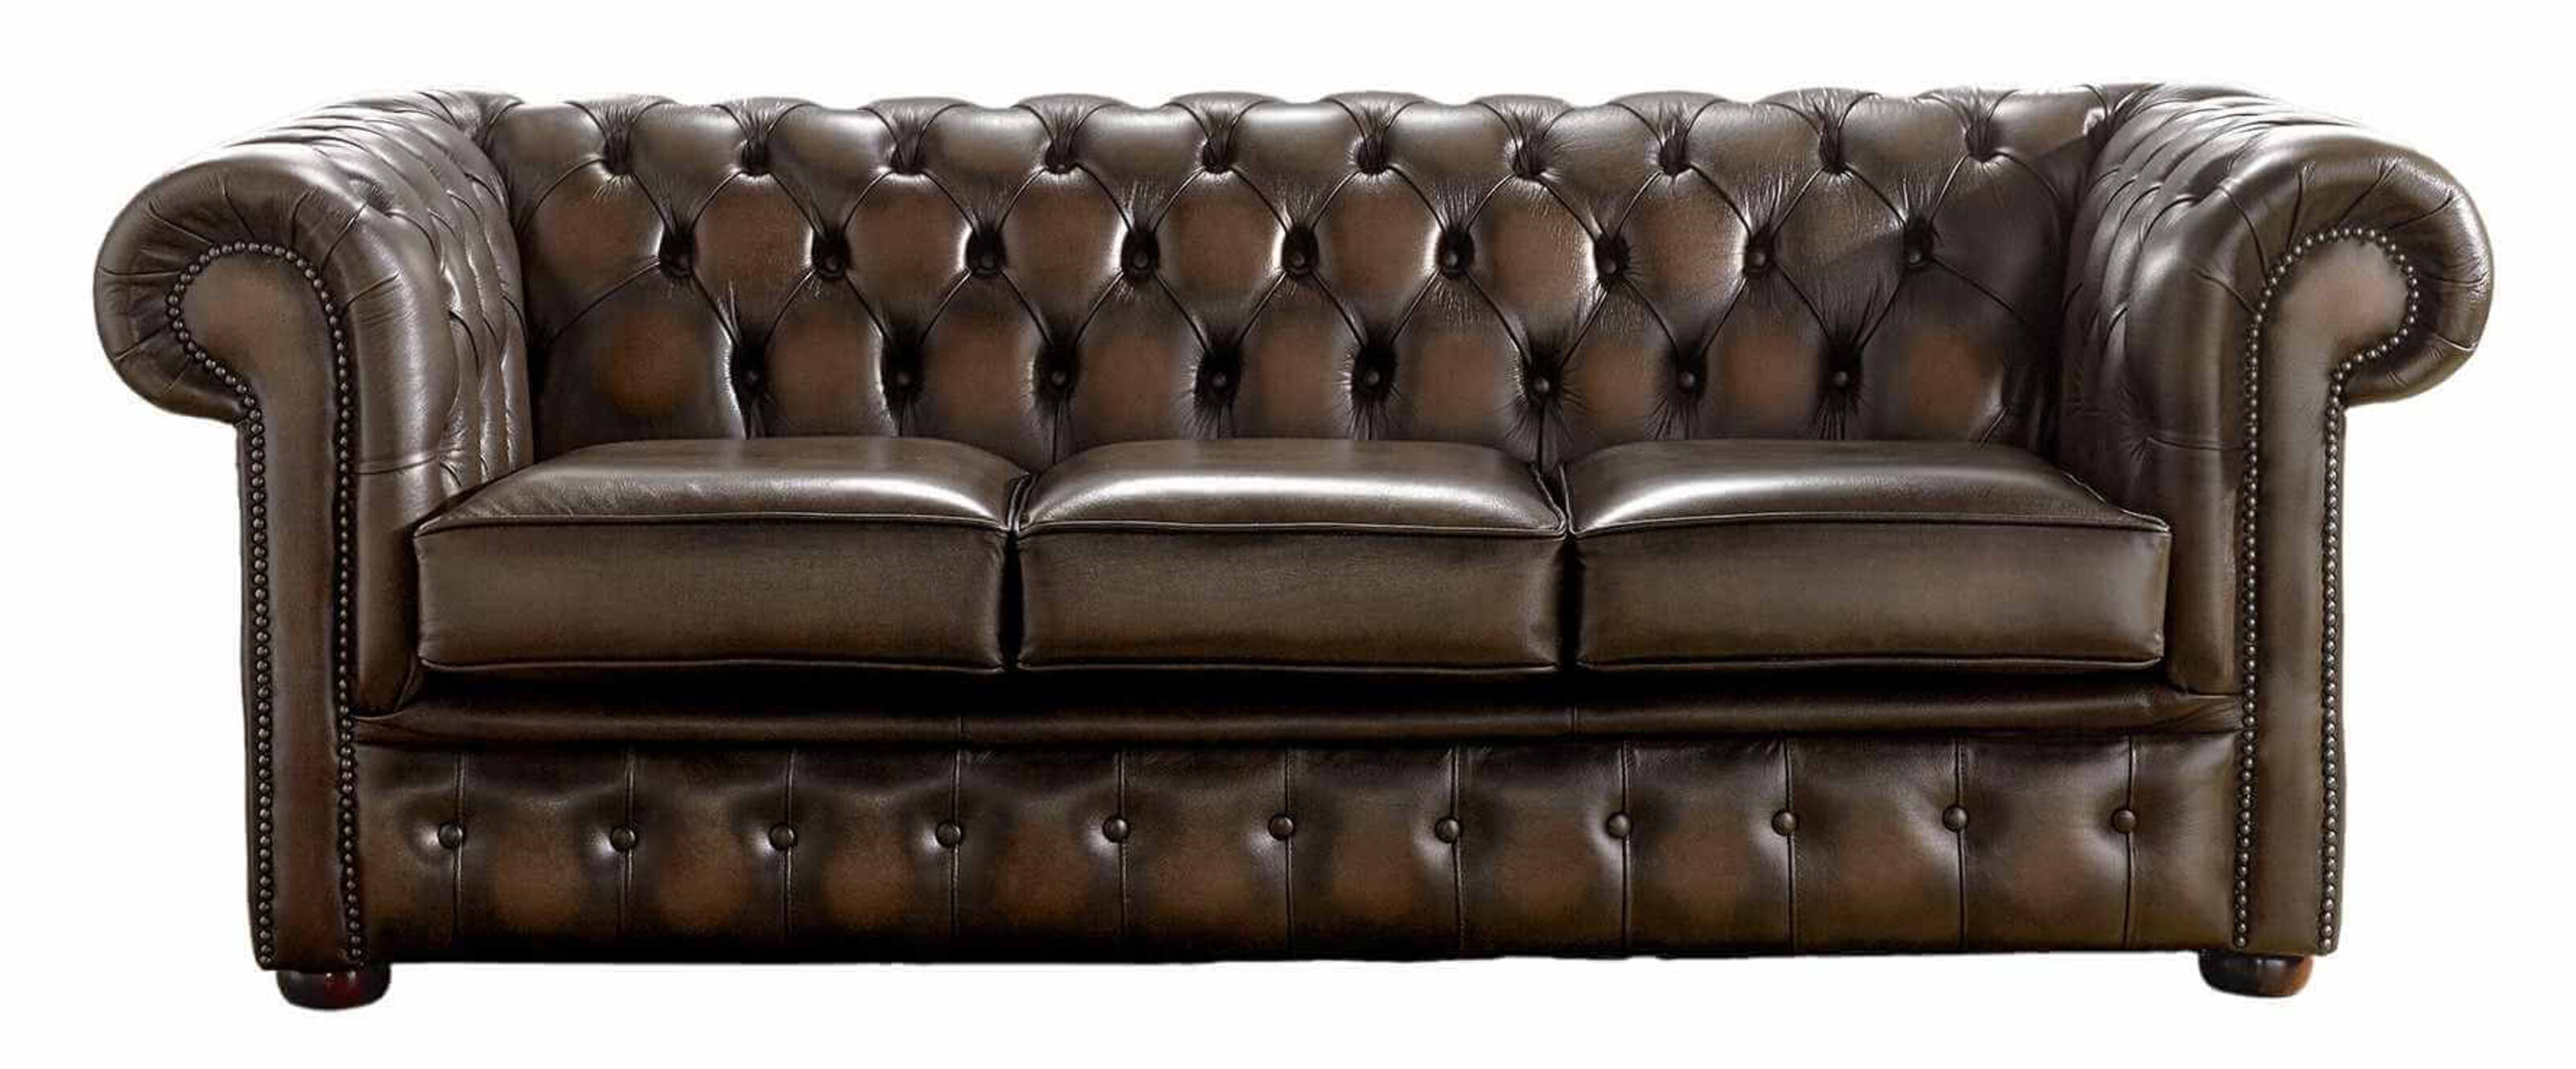 Timeless Chesterfield Sofas: Find Them in Australia  %Post Title